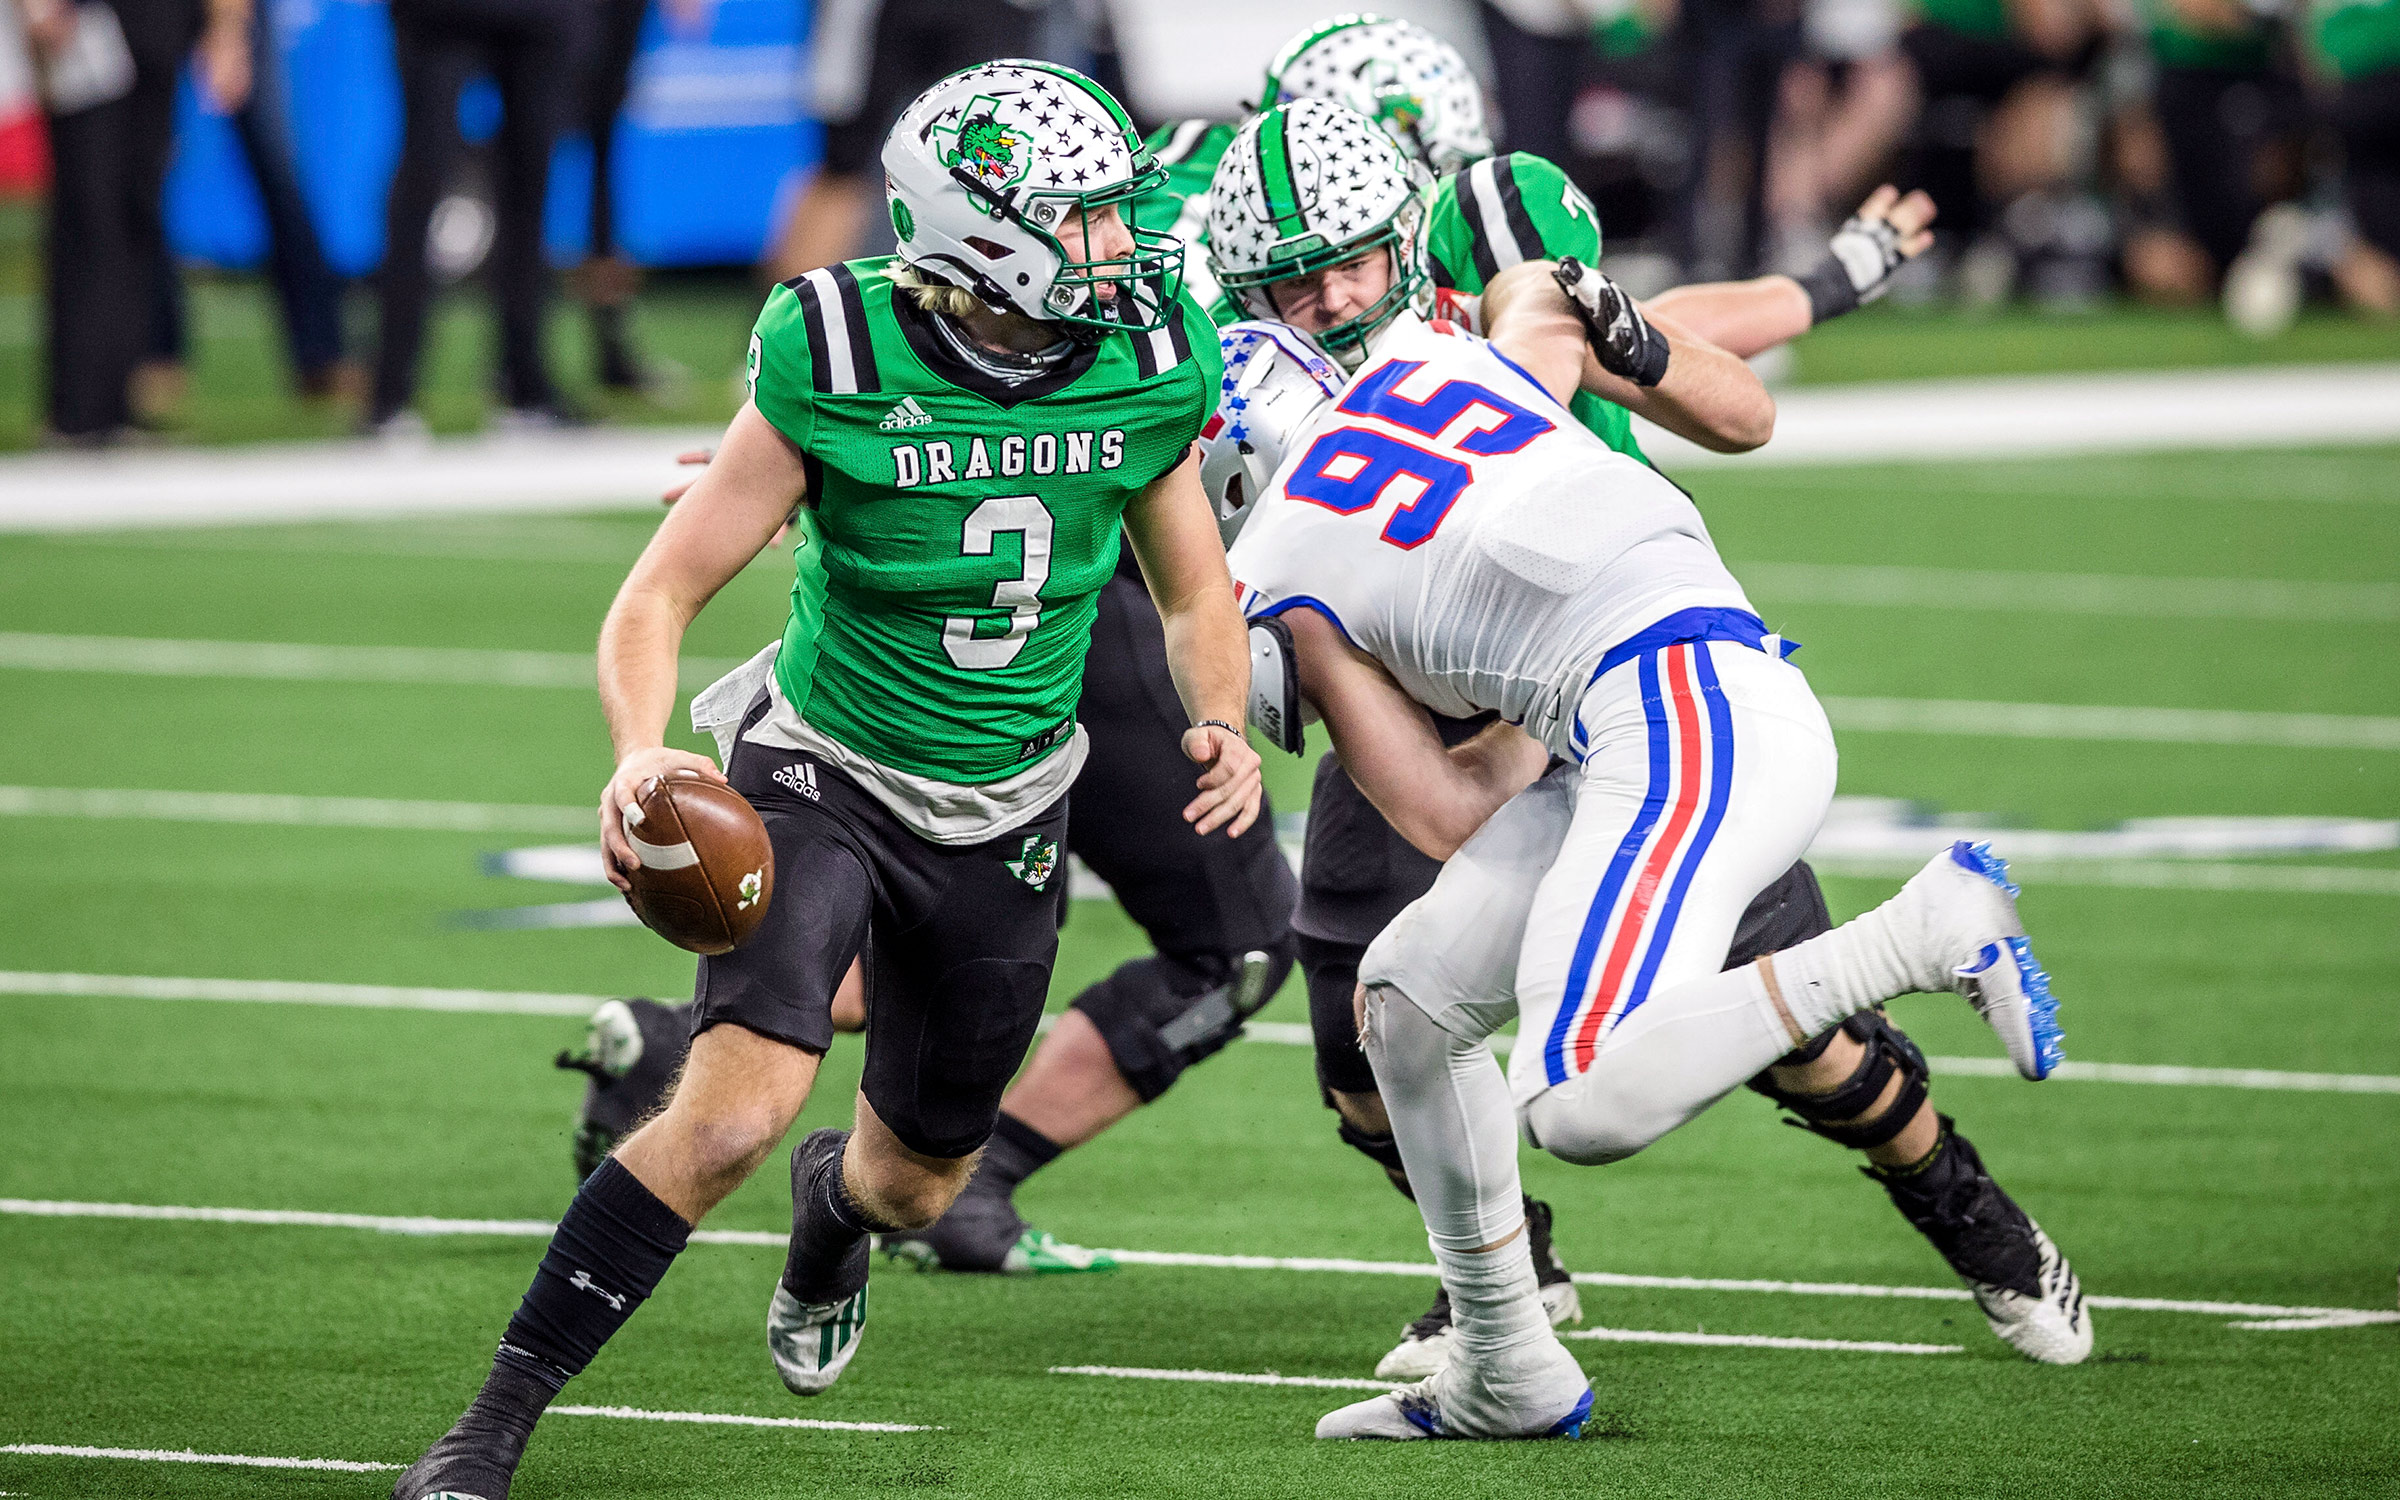 Texas High School Football Didnt Have to Lose Quinn Ewers image